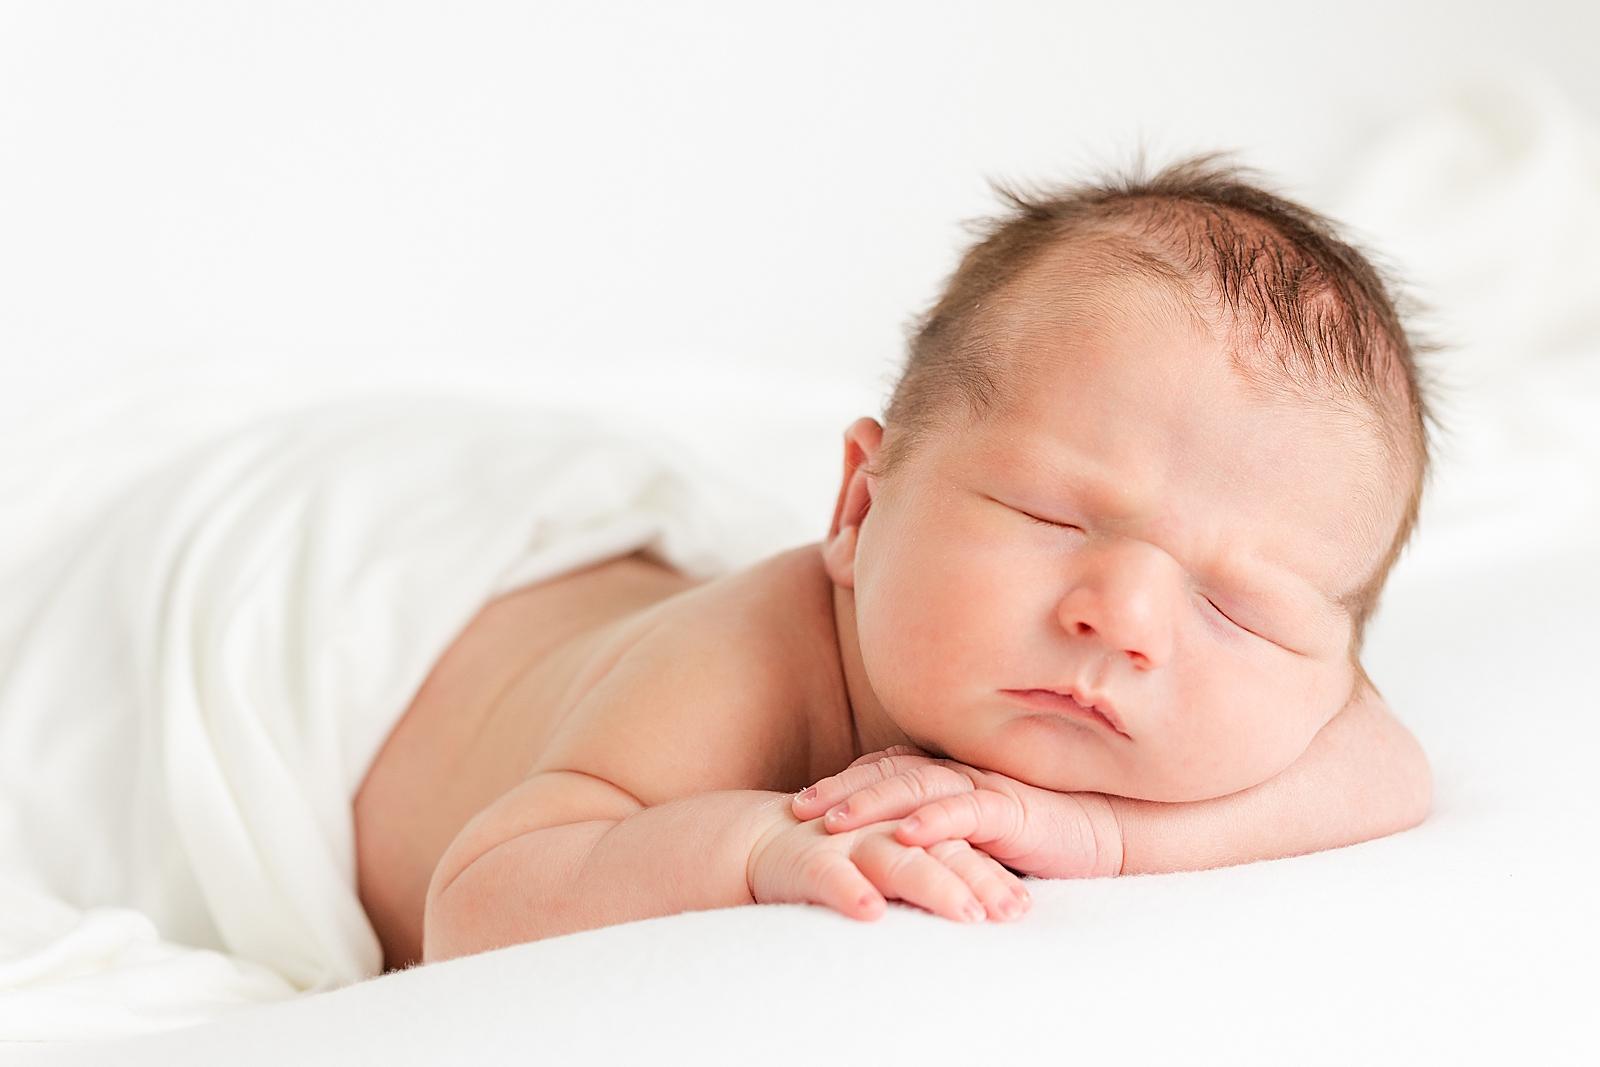 Posed newborn photo of baby sleeping with hands resting under shin on white background and white blanket draped over him